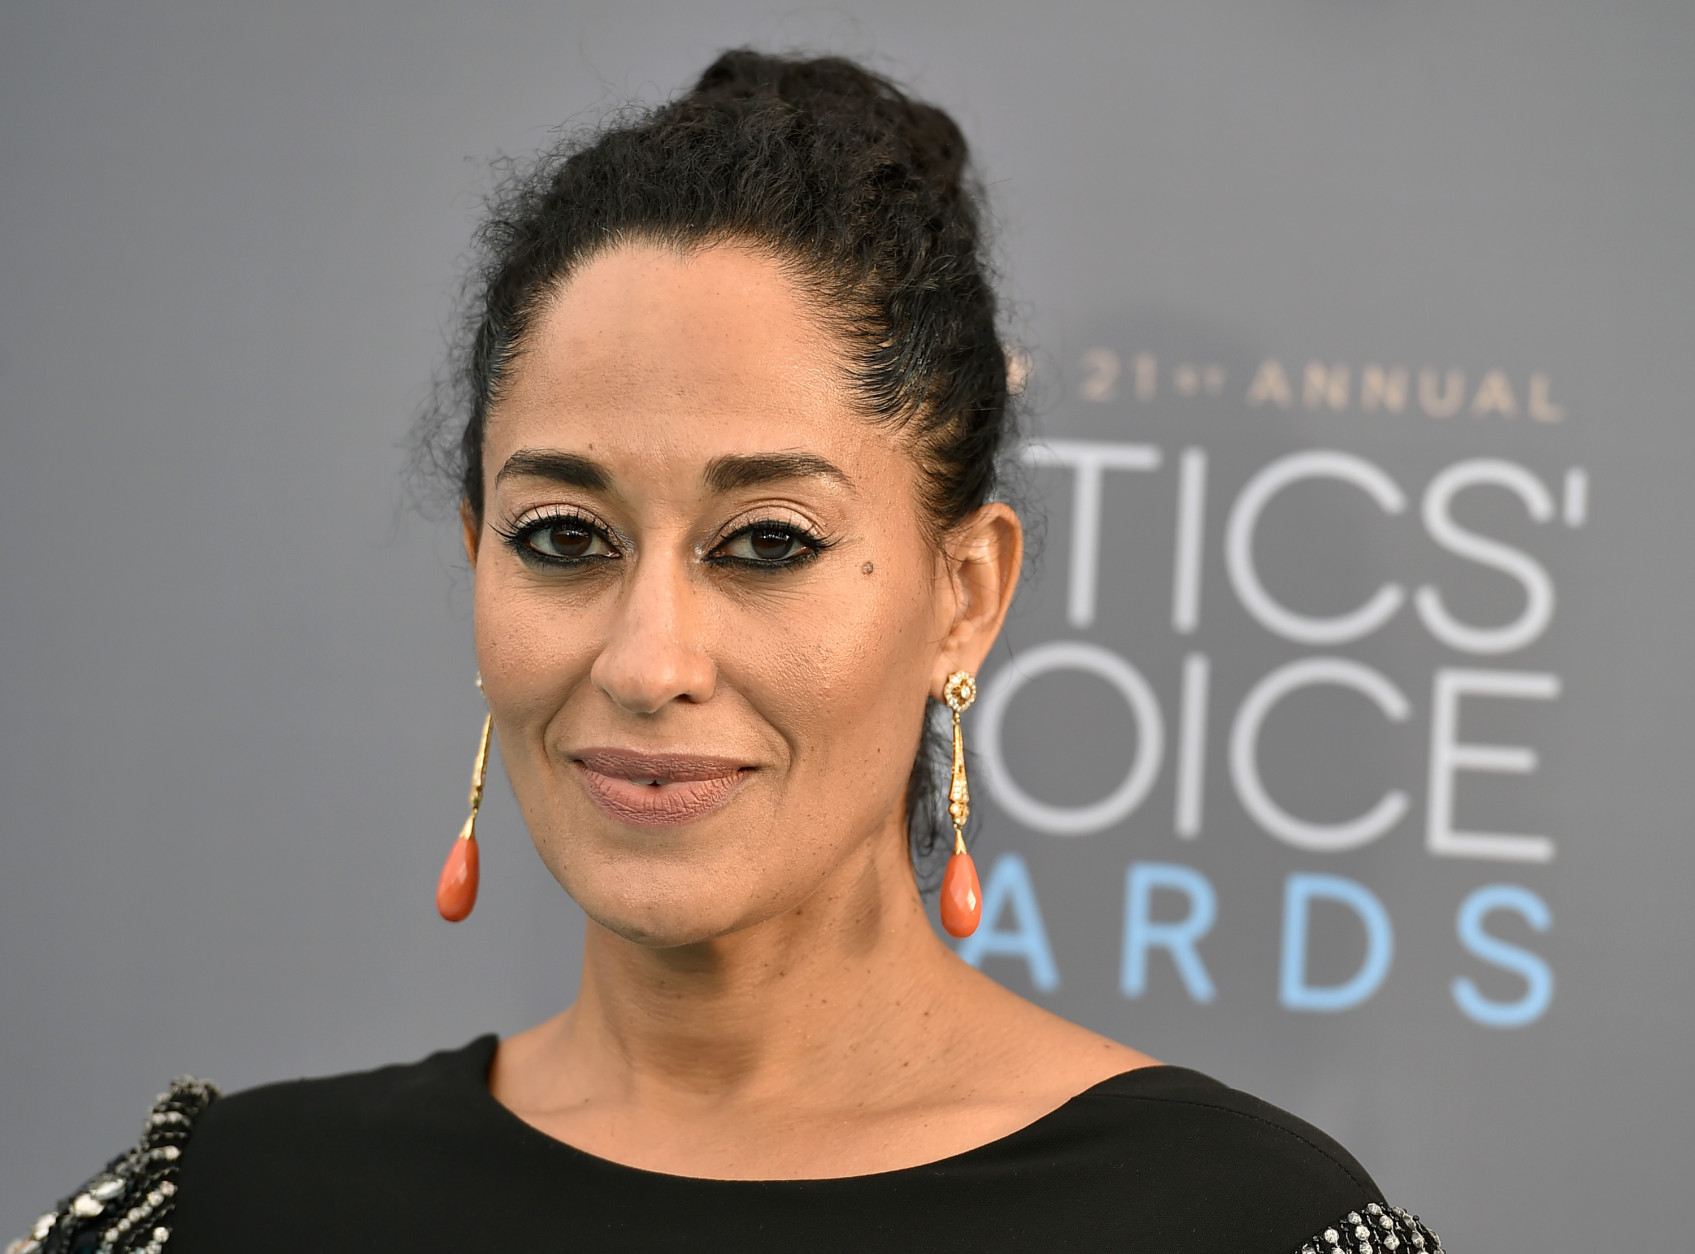 Tracee Ellis Ross arrives at the 21st annual Critics' Choice Awards at the Barker Hangar on Sunday, Jan. 17, 2016, in Santa Monica, Calif. (Photo by Jordan Strauss/Invision/AP)